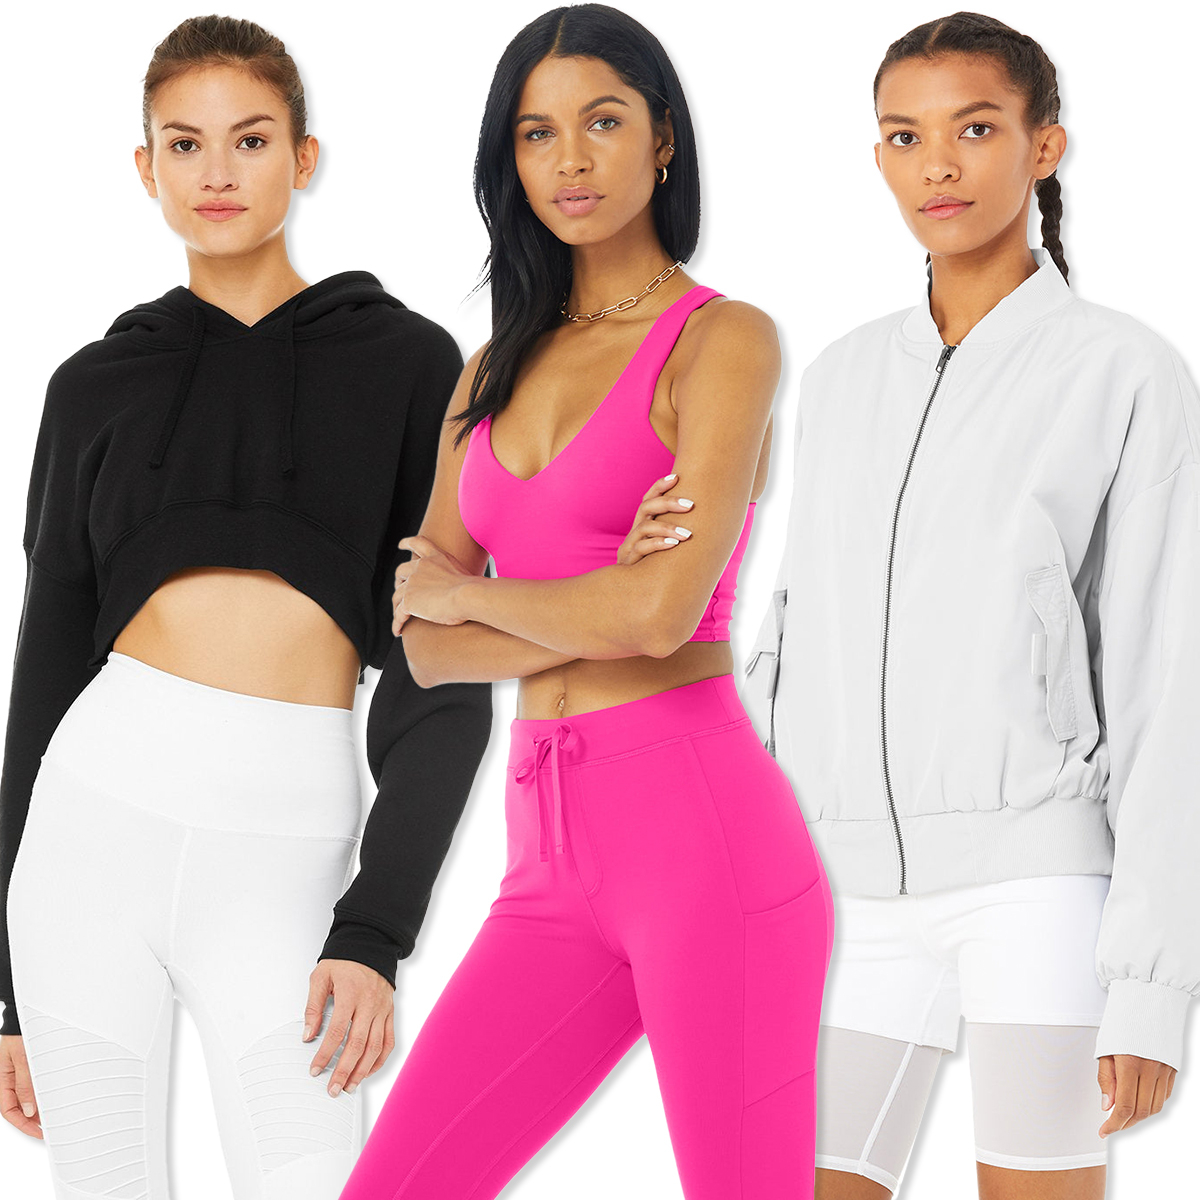 Alo Yoga's Bestselling Workout Clothes Are on Major Sale — Shop Them Here